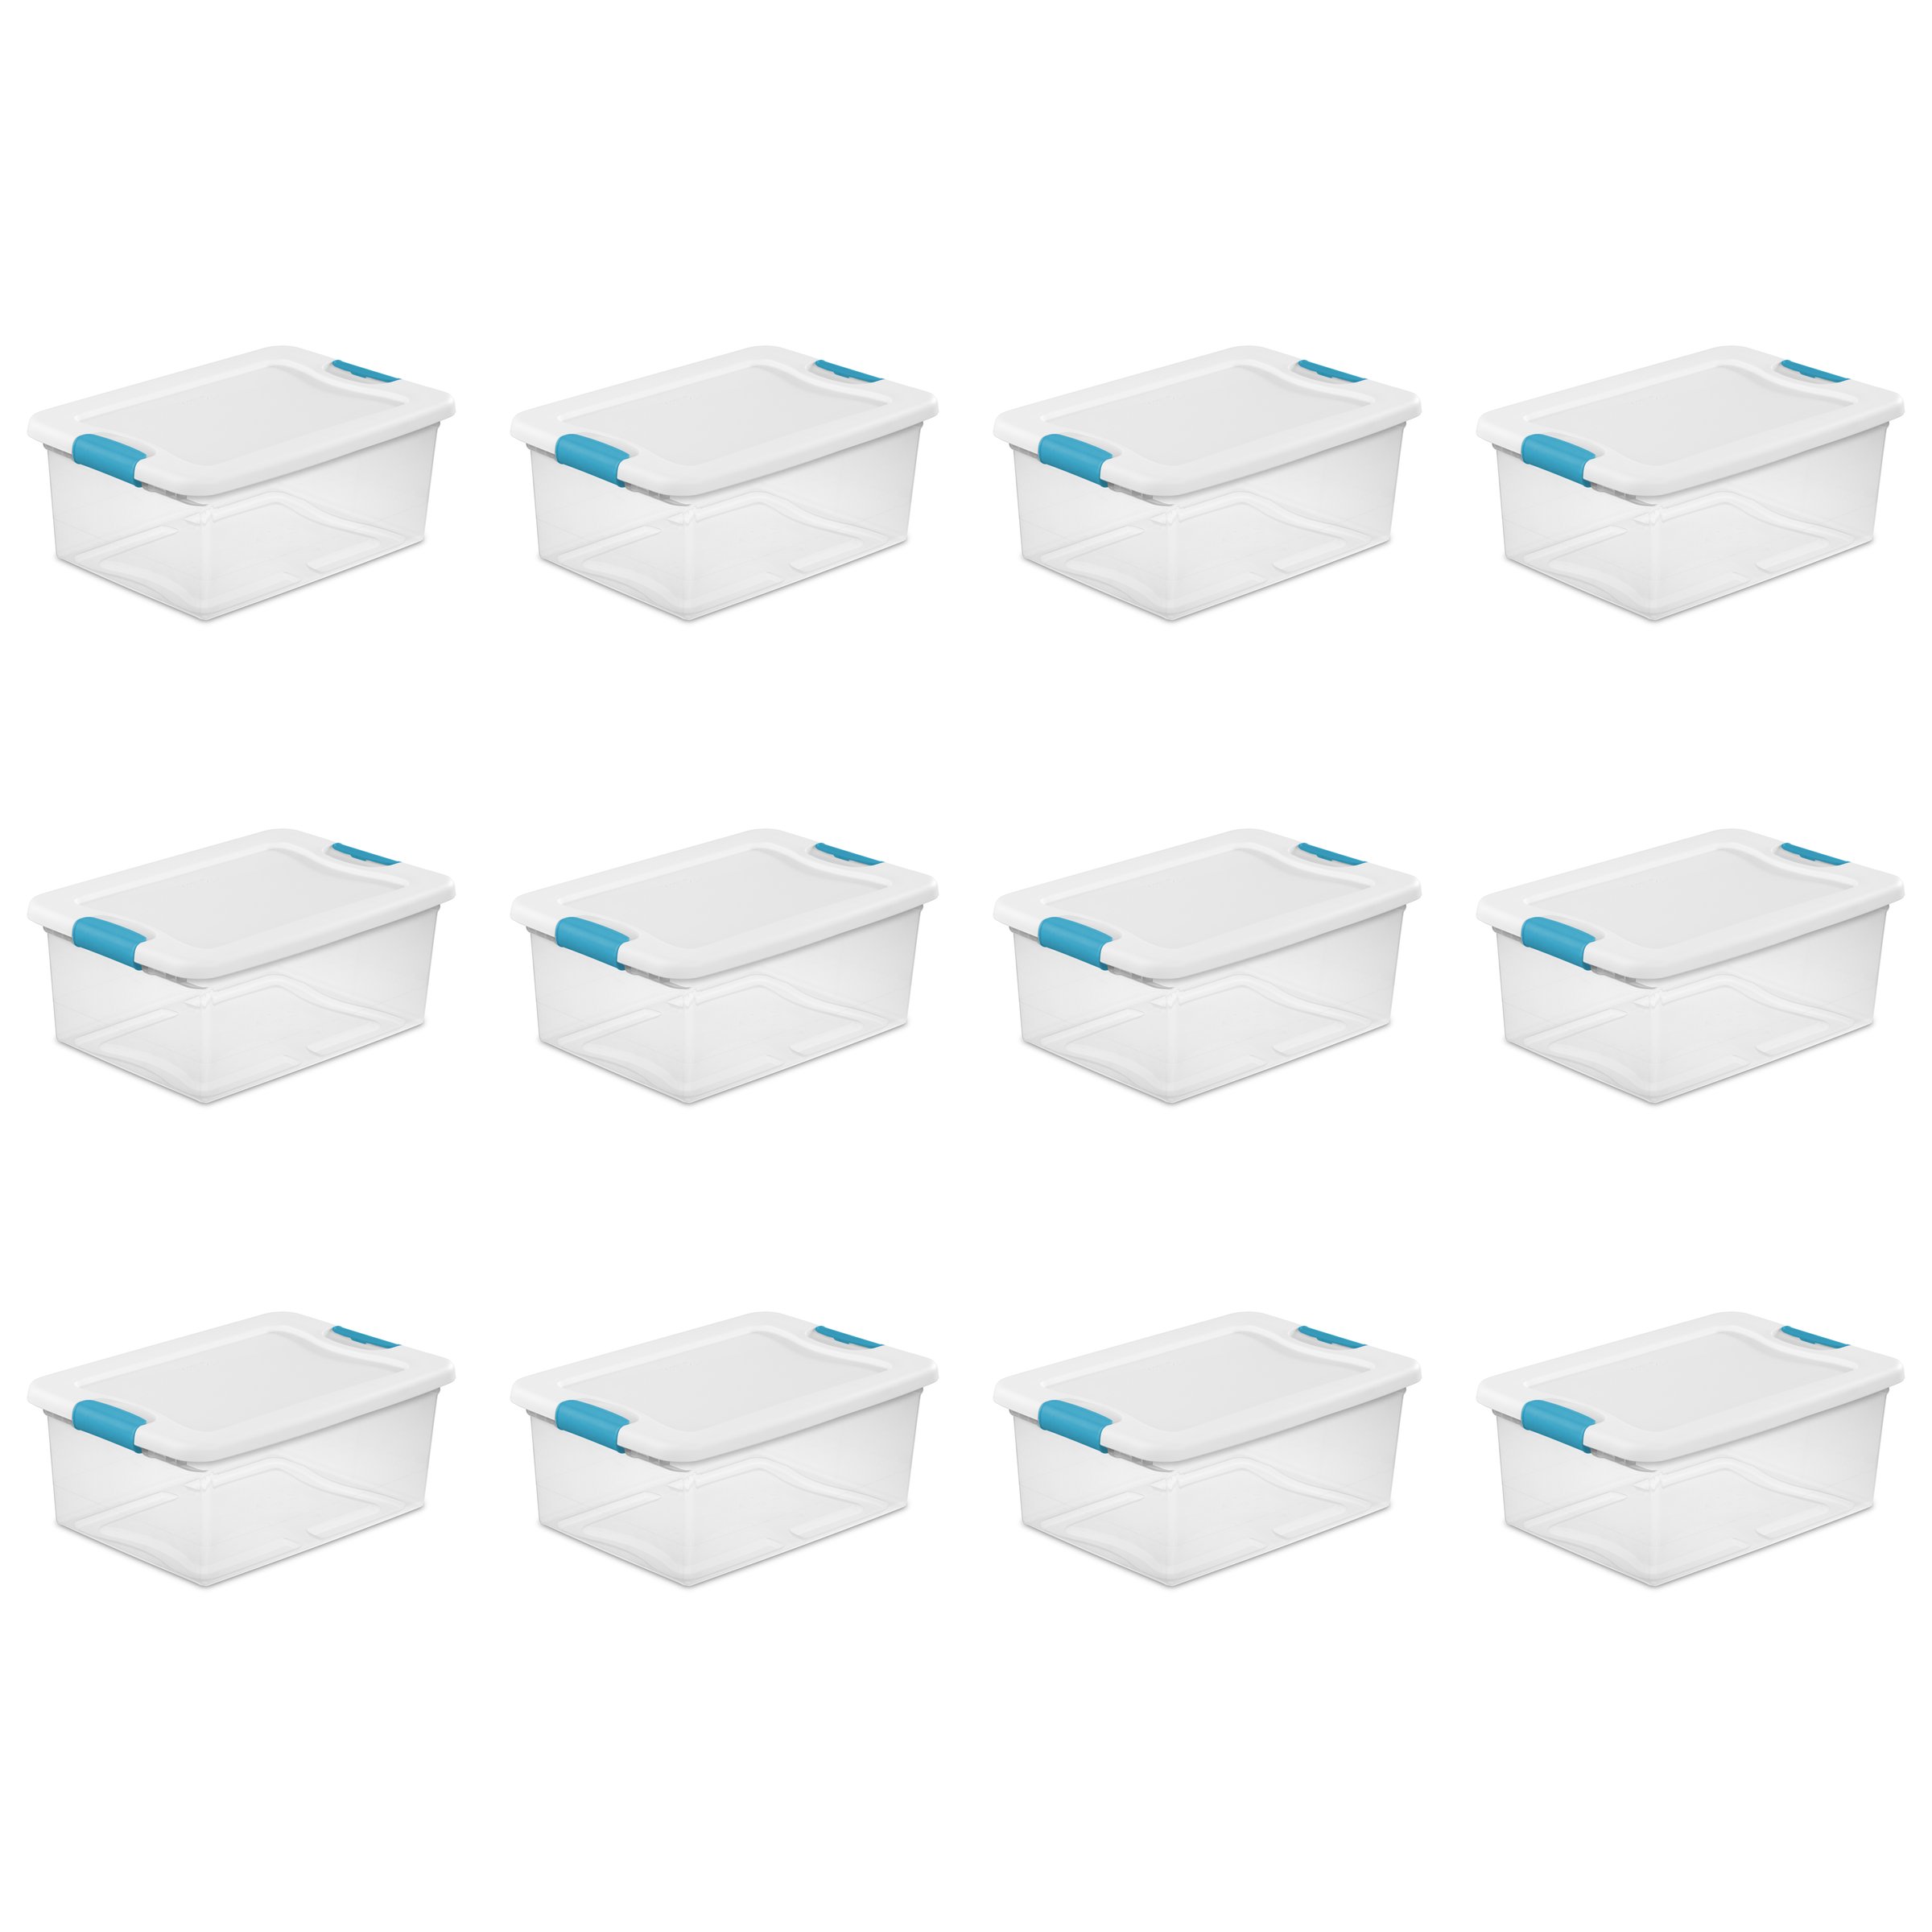 Sterilite Clear Storage Boxes with Latches Bundle (12-Pack)